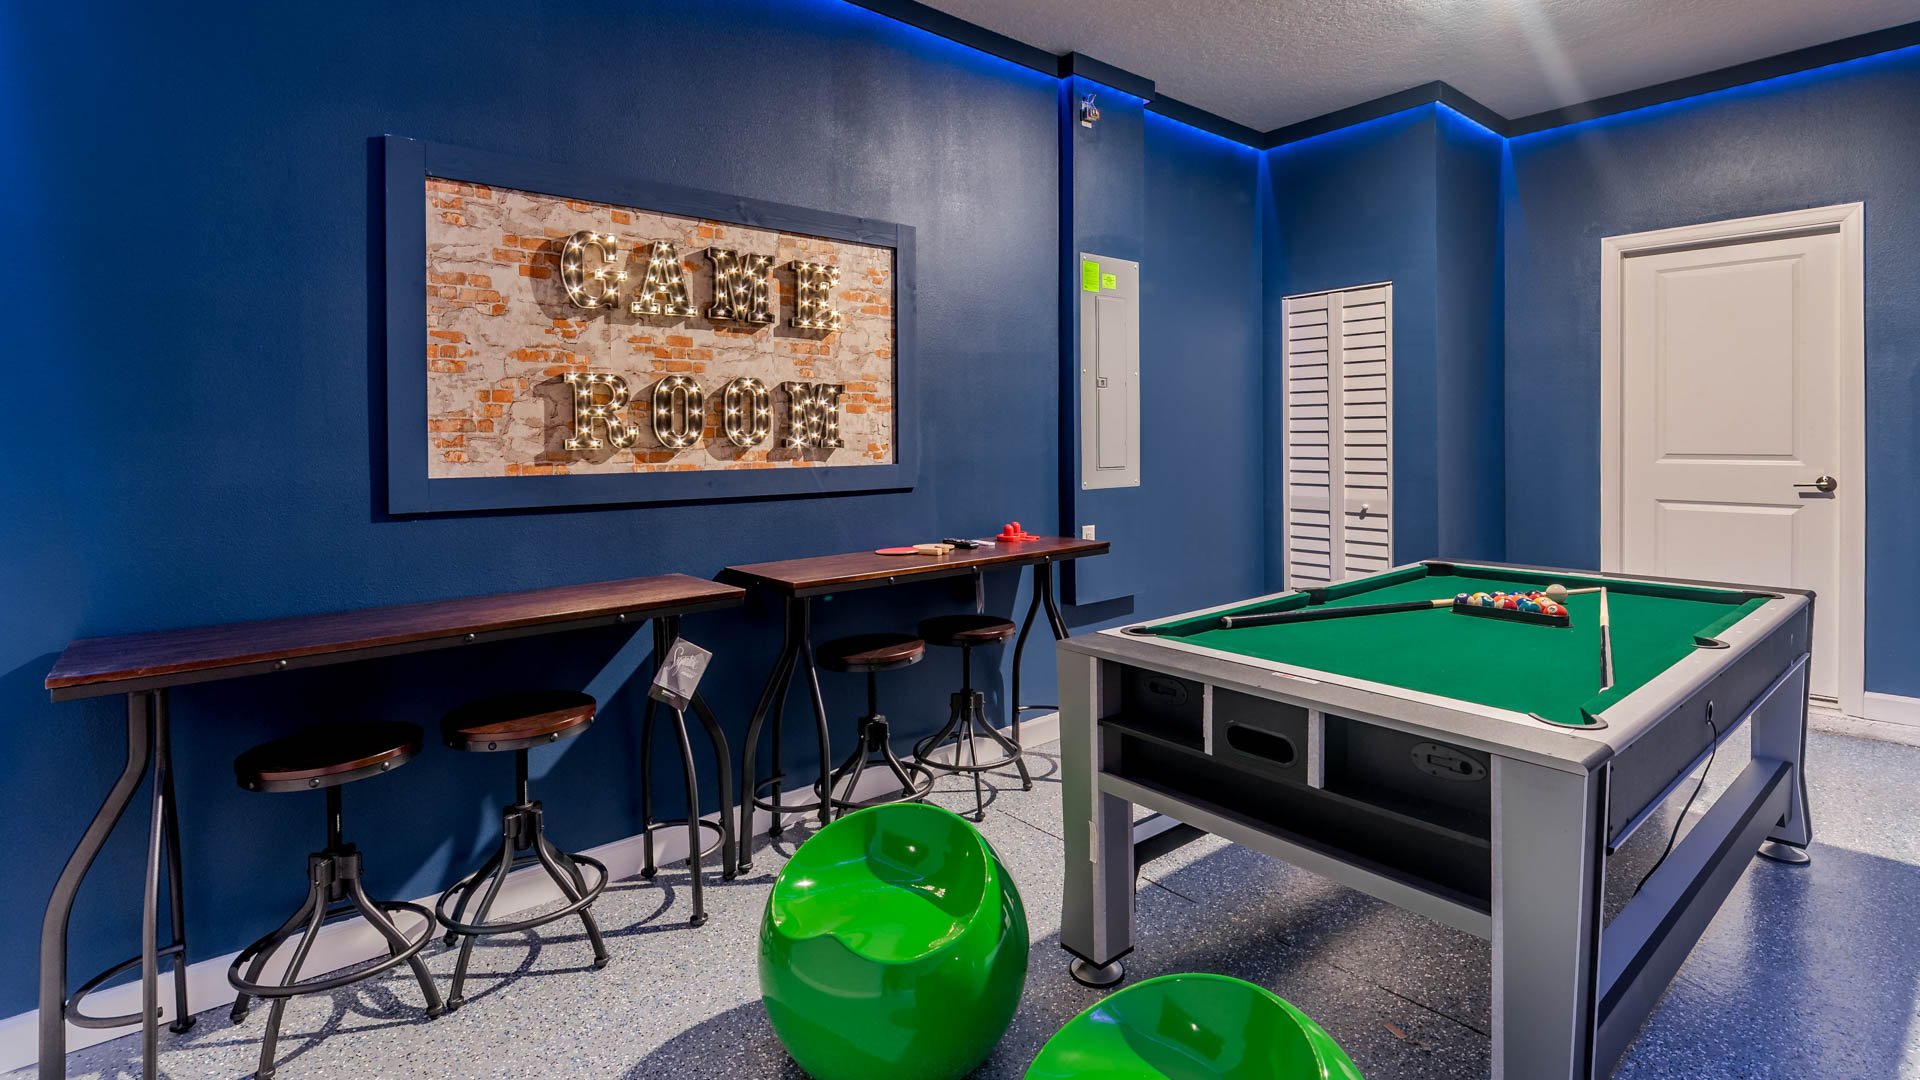 Game Room (Angle)
Pool Table flips to Air Hockey.
Also Has a ping pong table topper